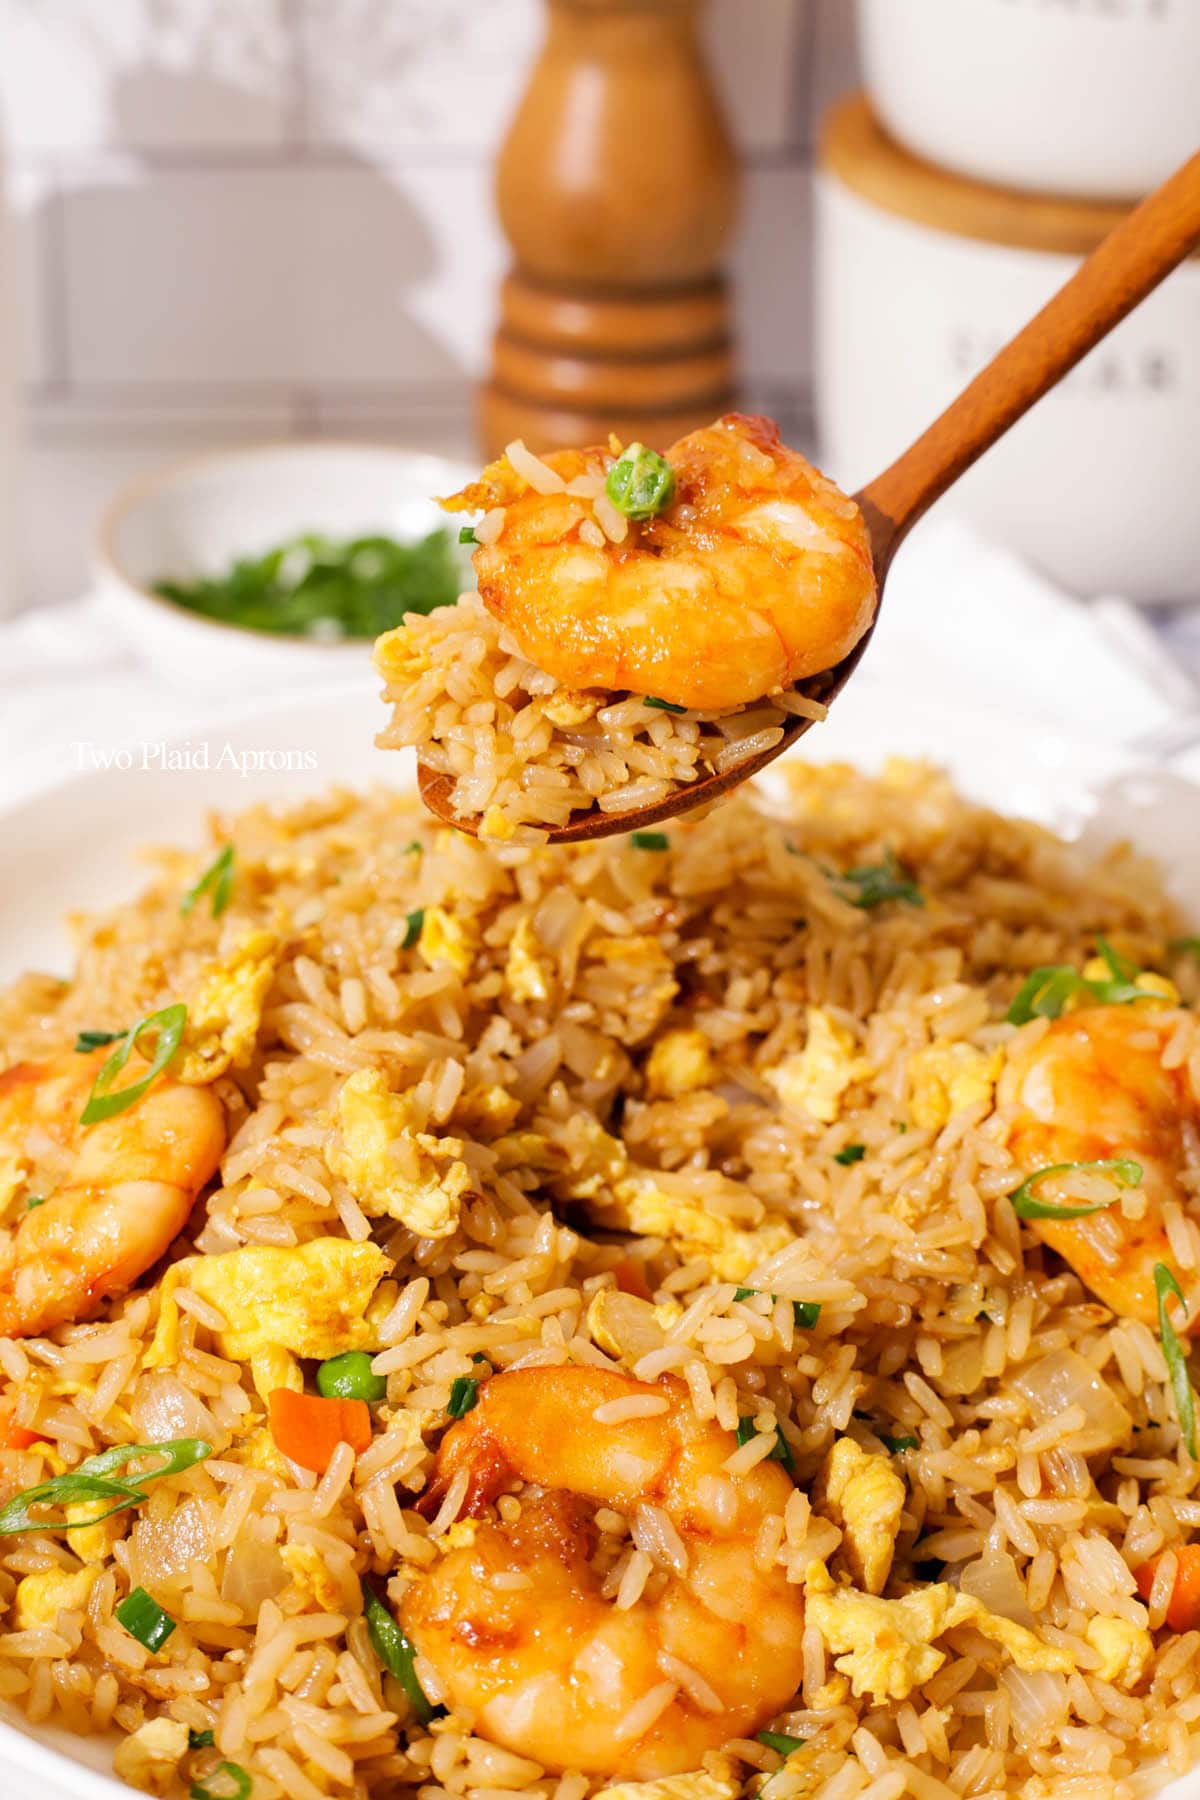 Picking up a spoonful of shrimp fried rice.